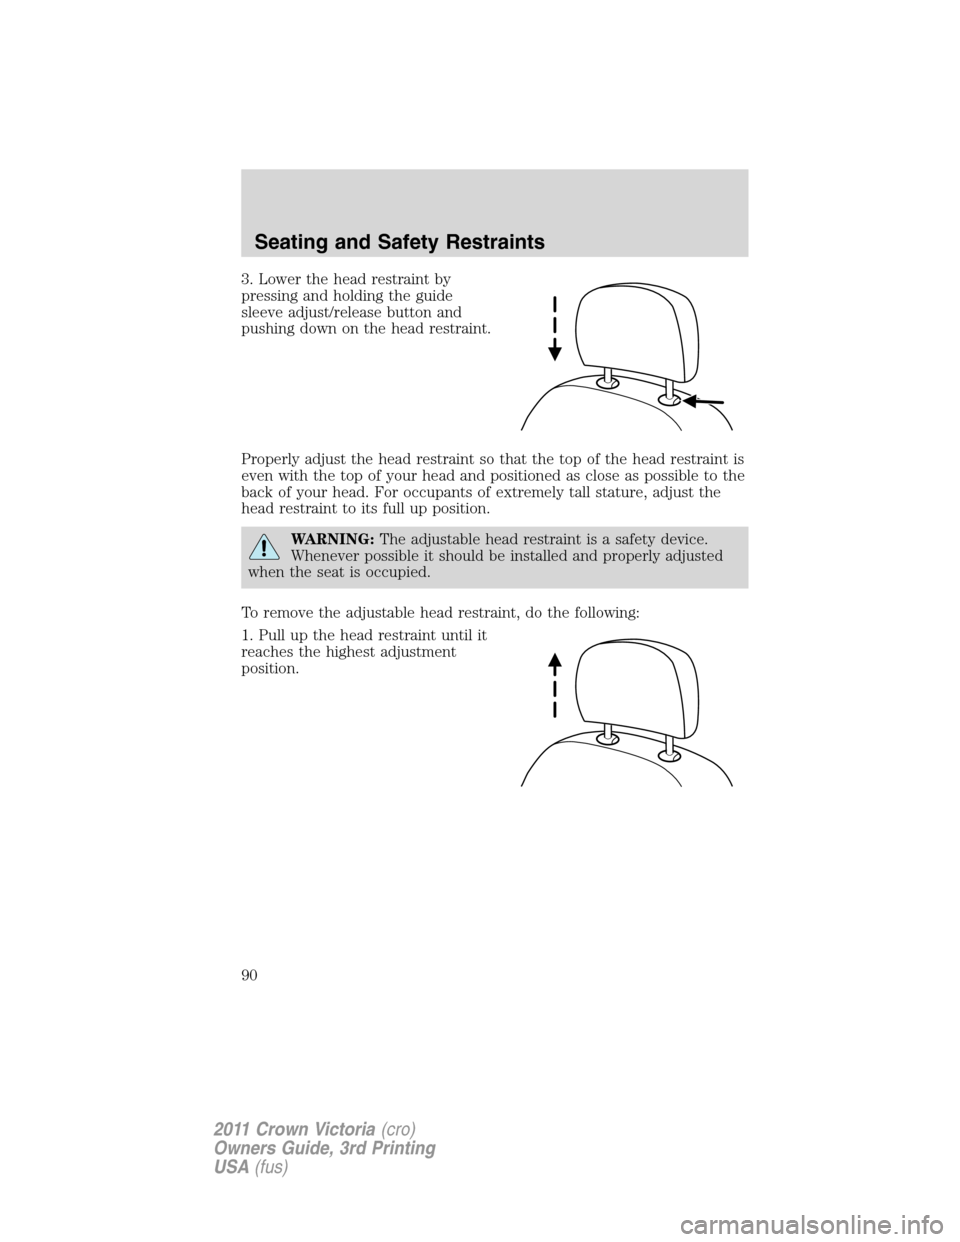 Mercury Grand Marquis 1011  s Manual Online 3. Lower the head restraint by
pressing and holding the guide
sleeve adjust/release button and
pushing down on the head restraint.
Properly adjust the head restraint so that the top of the head restra